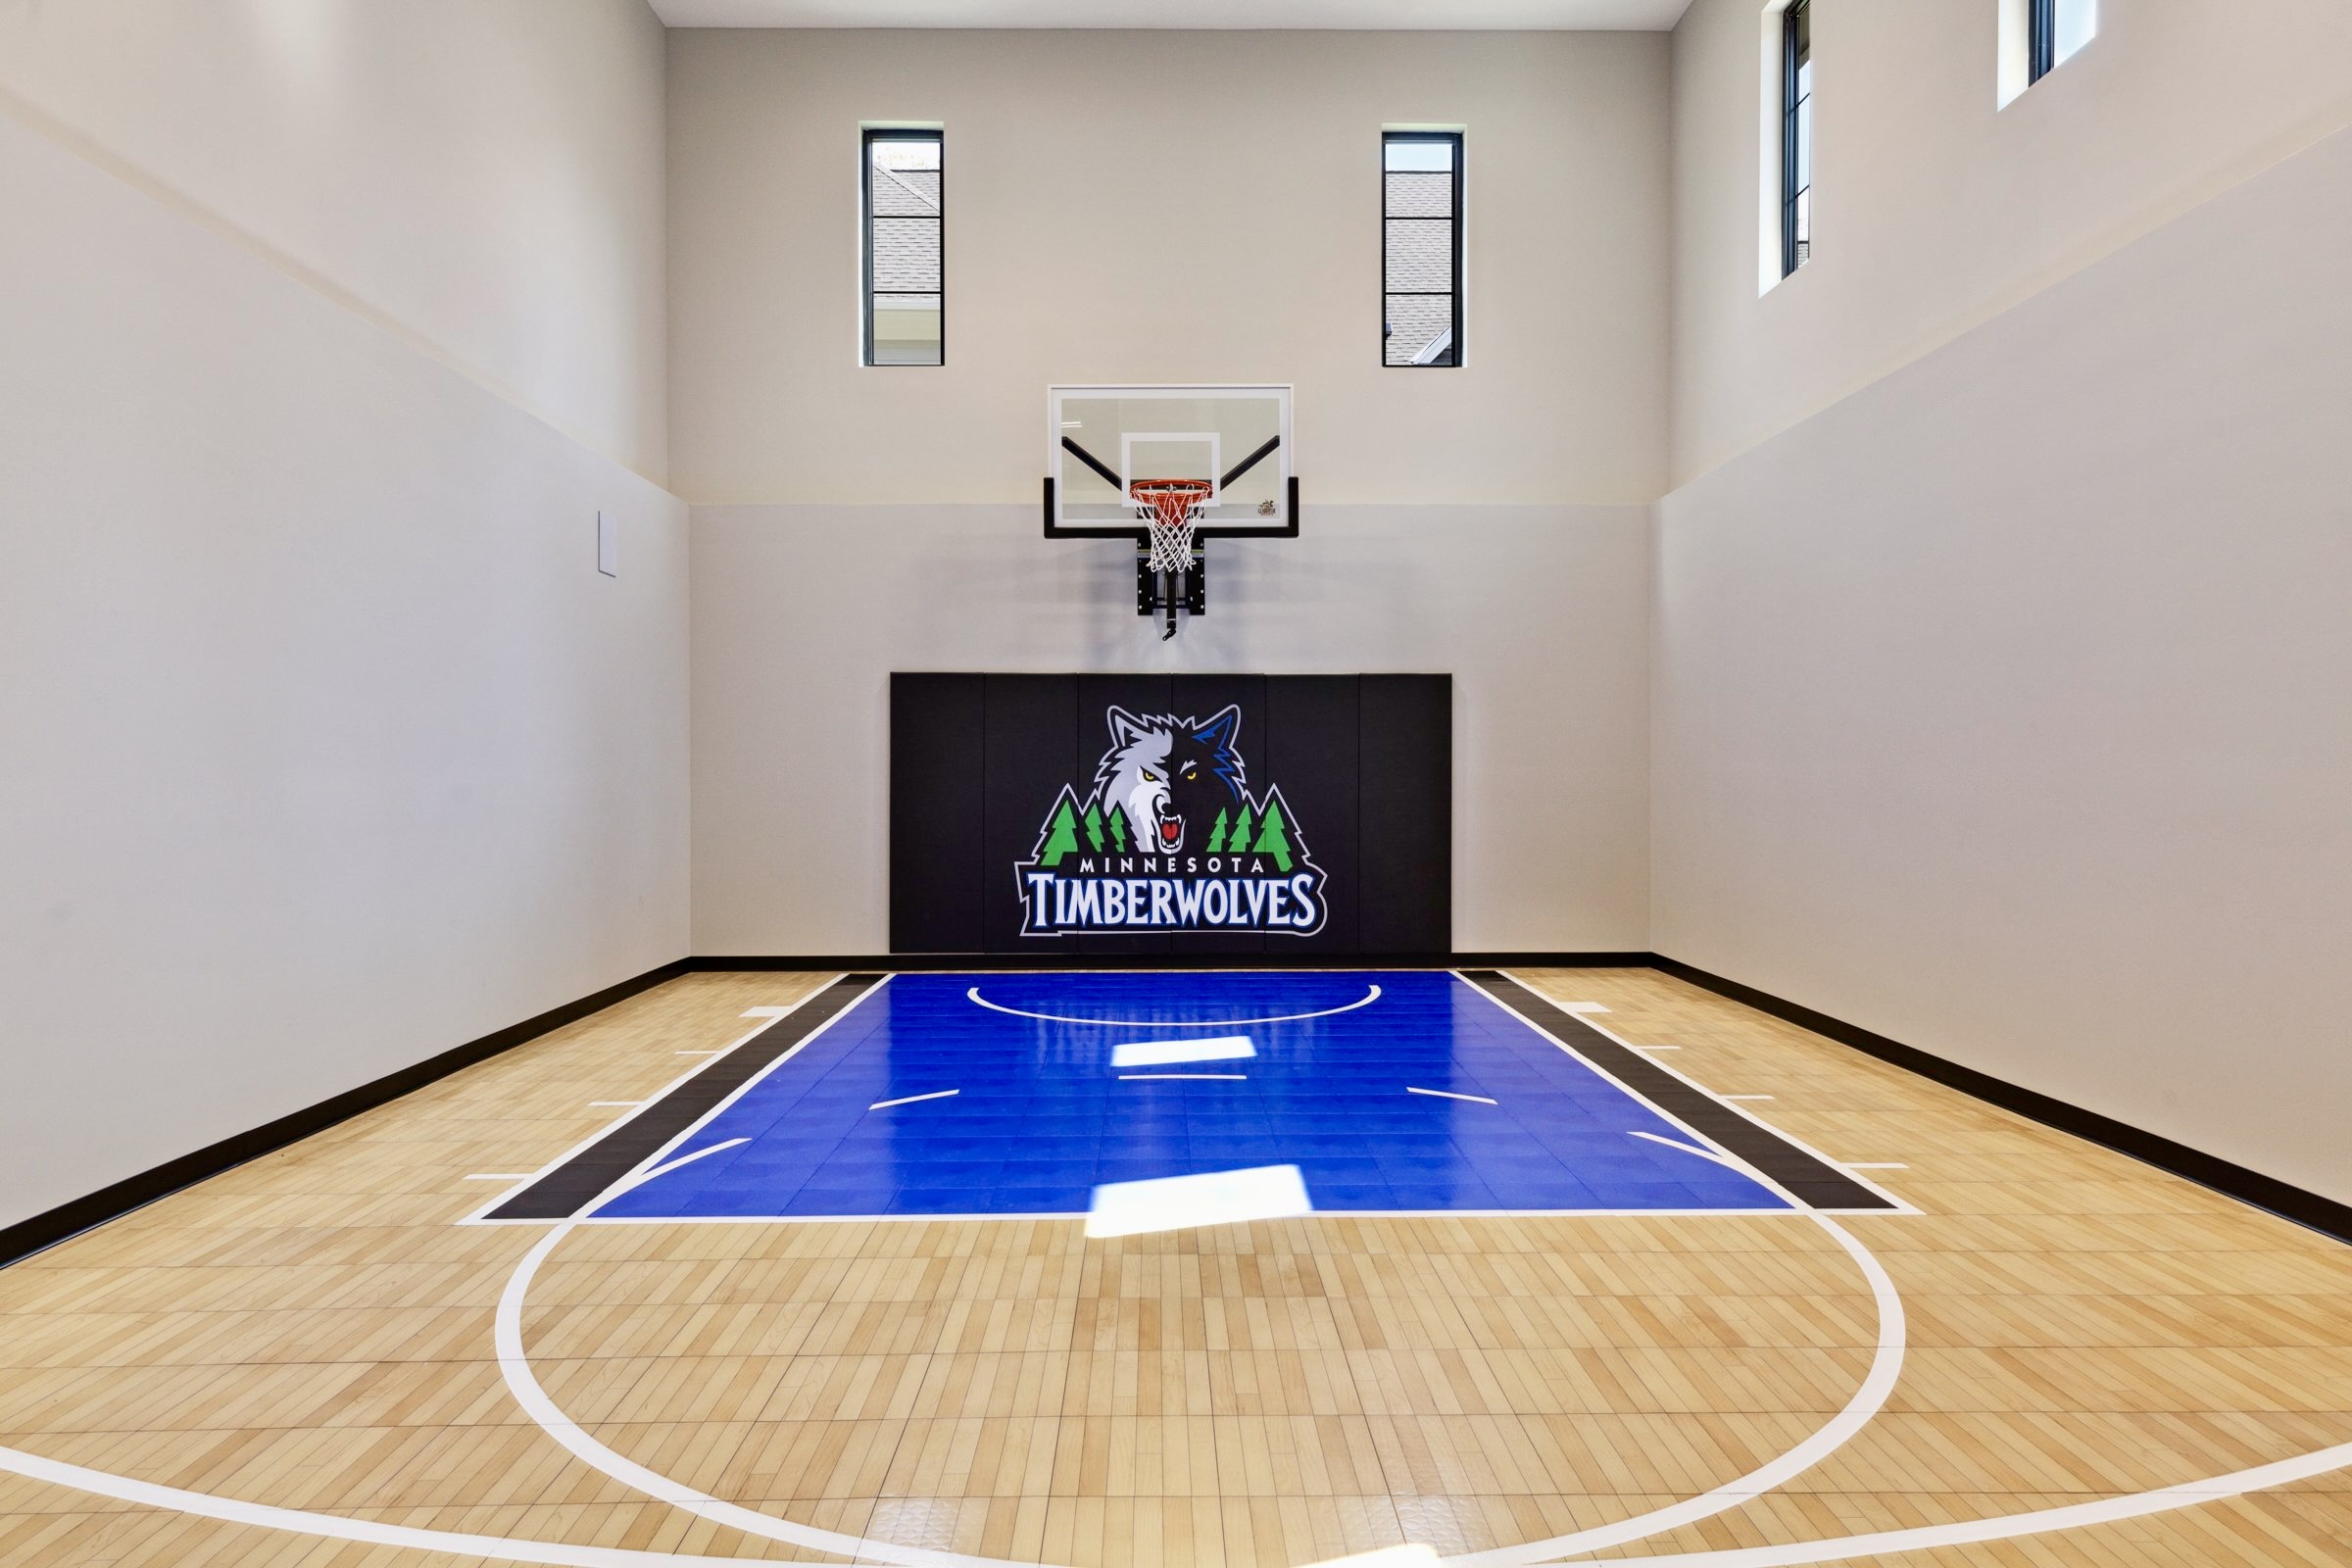 Indoor Home Gyms & Courts, Athletic Surfaces